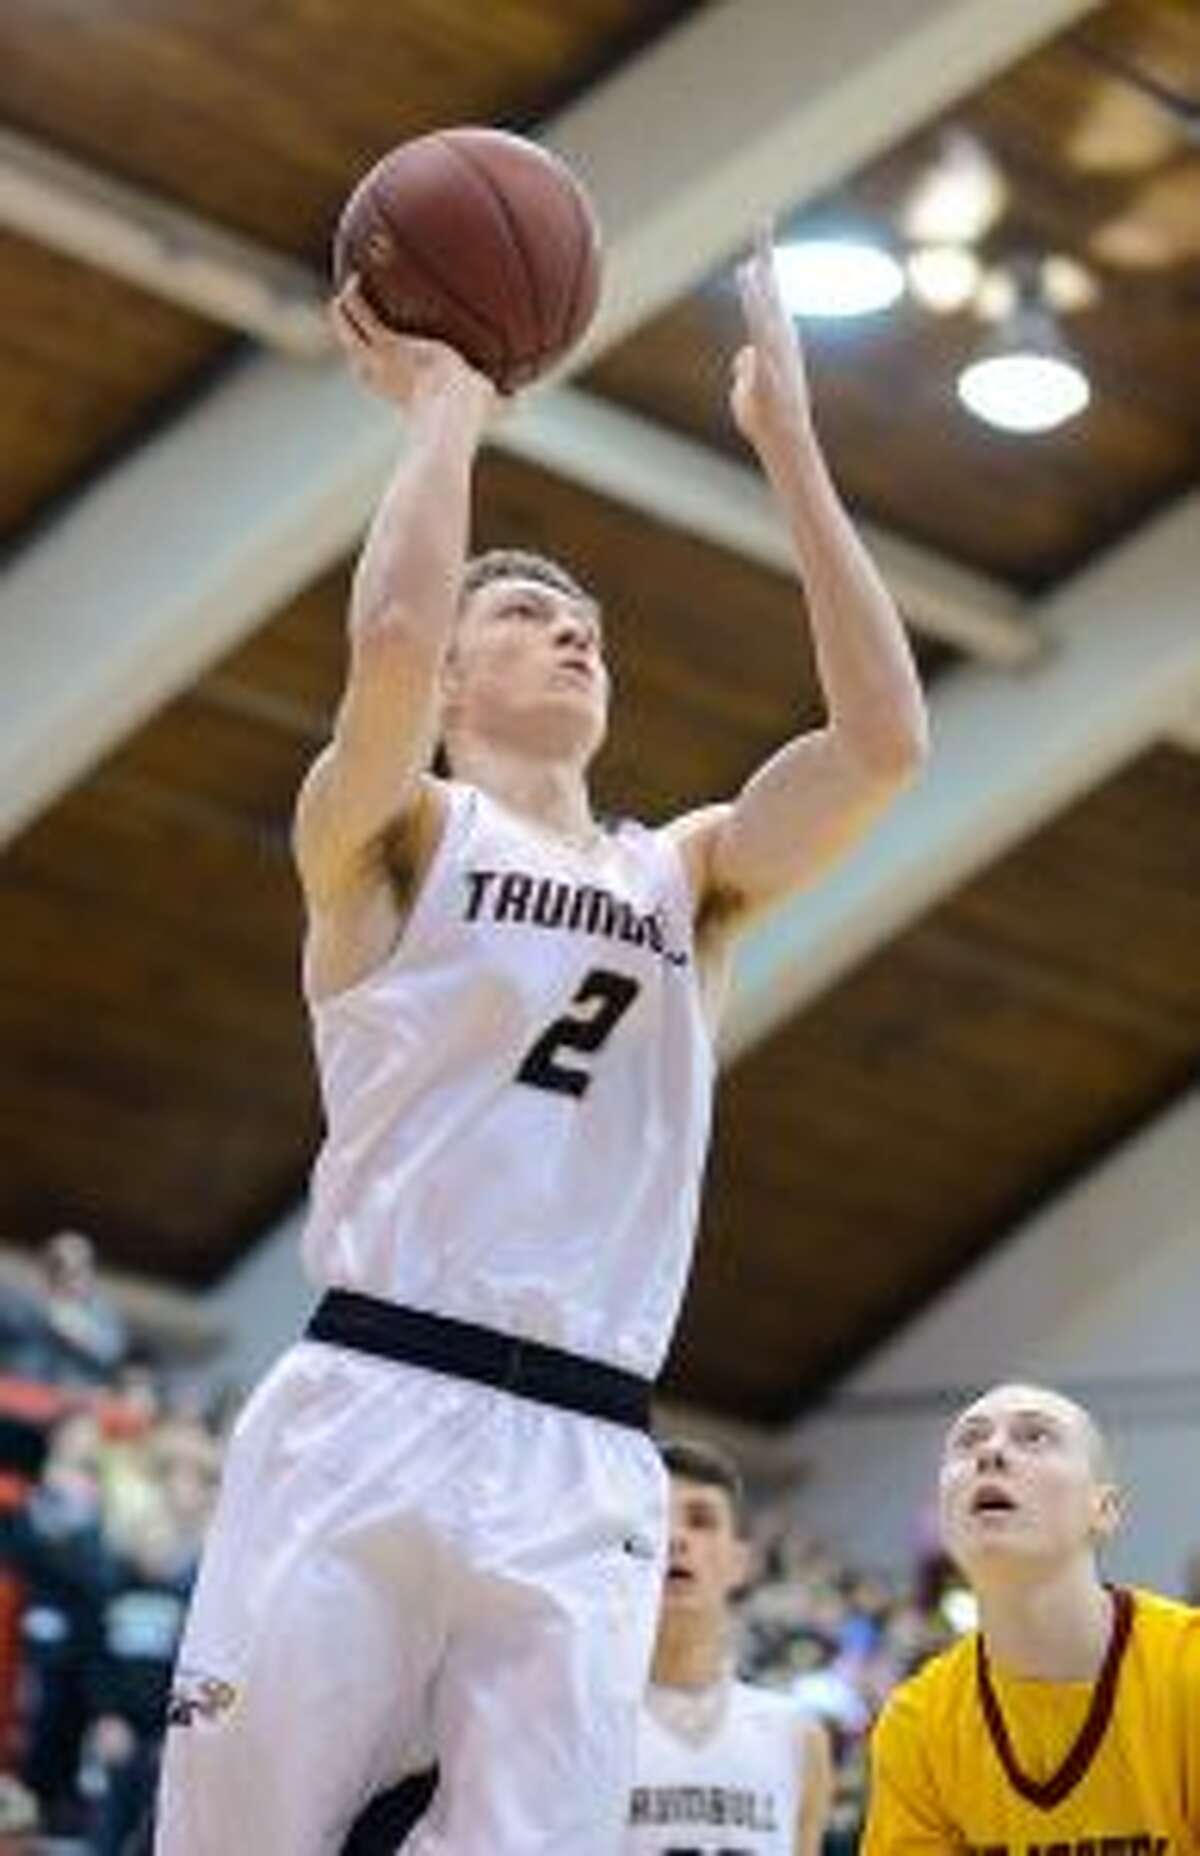 Jack Lynch scored 10 points for Trumbull. — David G. Whitham photo